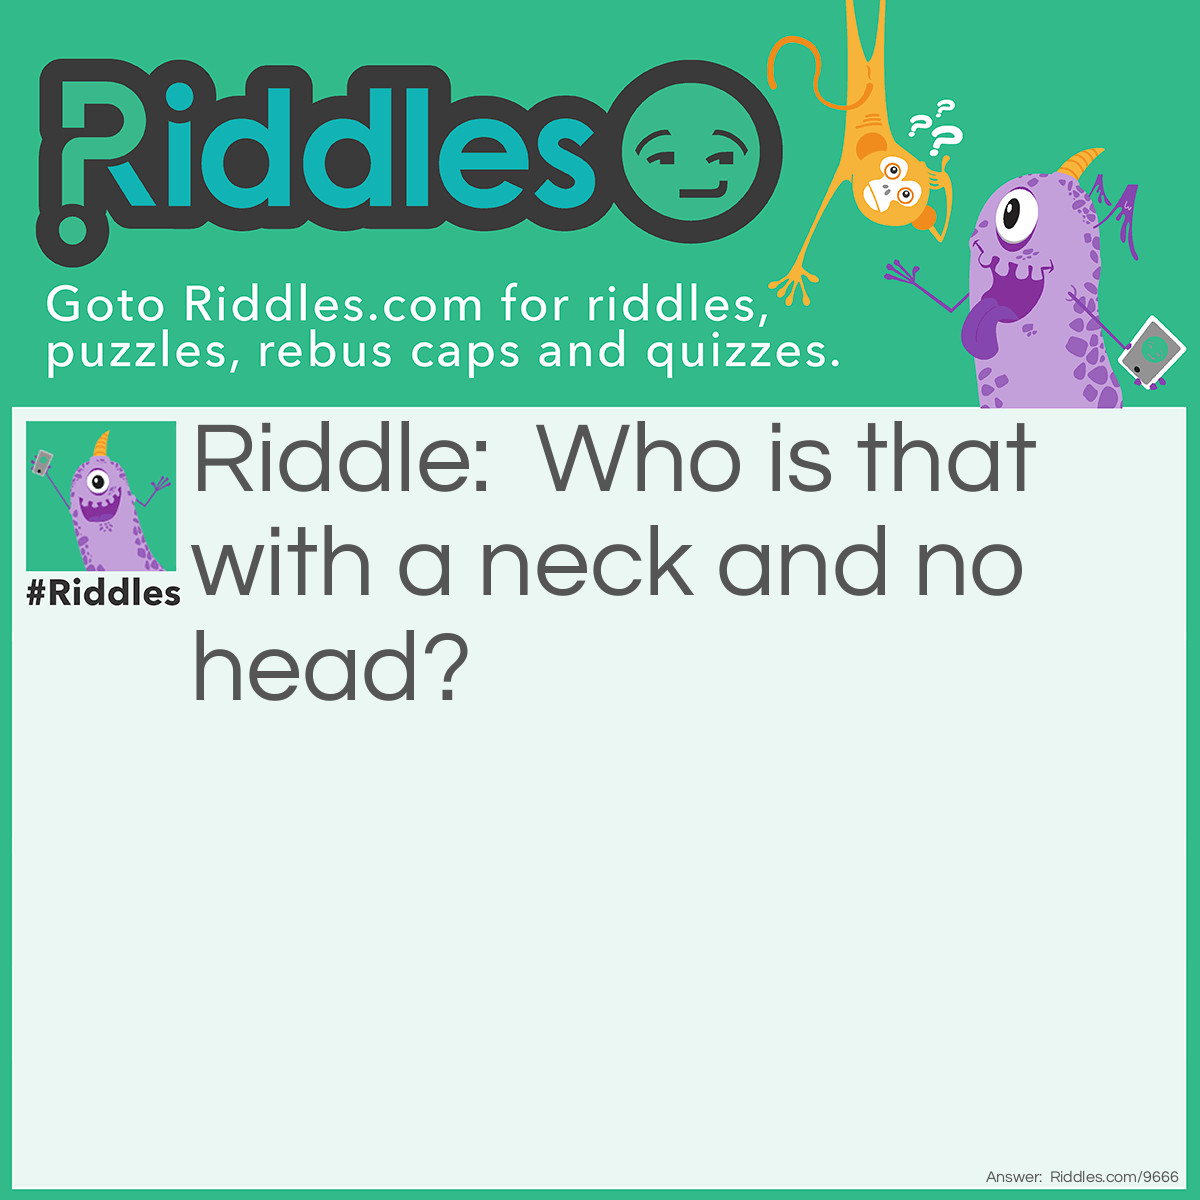 Riddle: Who is that with a neck and no head? Answer: A shirt.